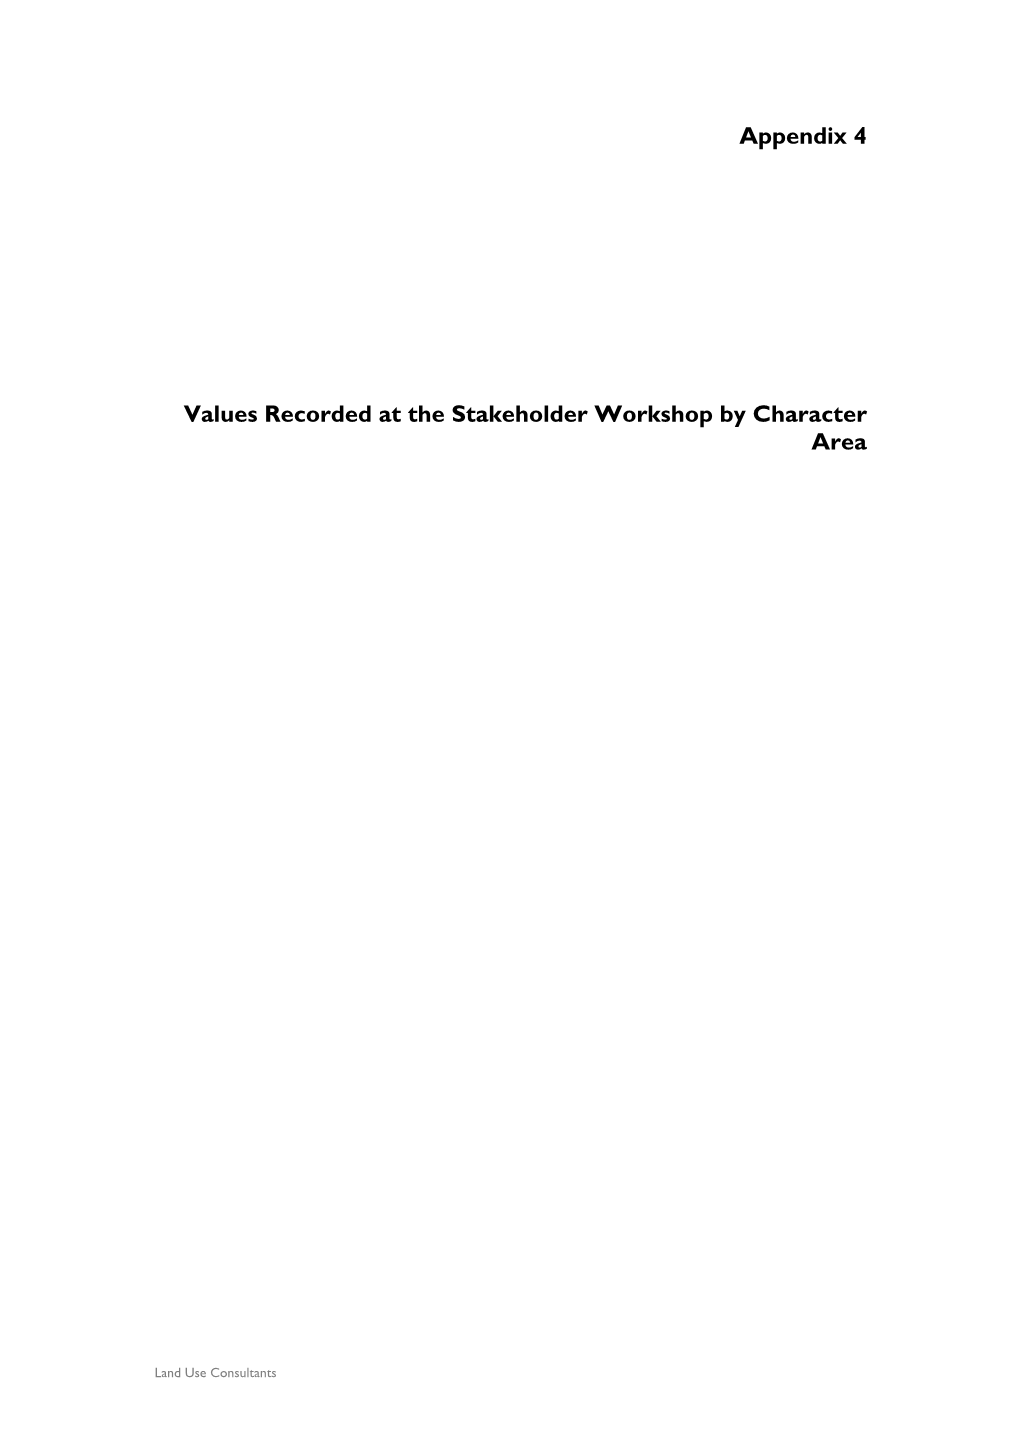 Appendix 4 Values Recorded at the Stakeholder Workshop By